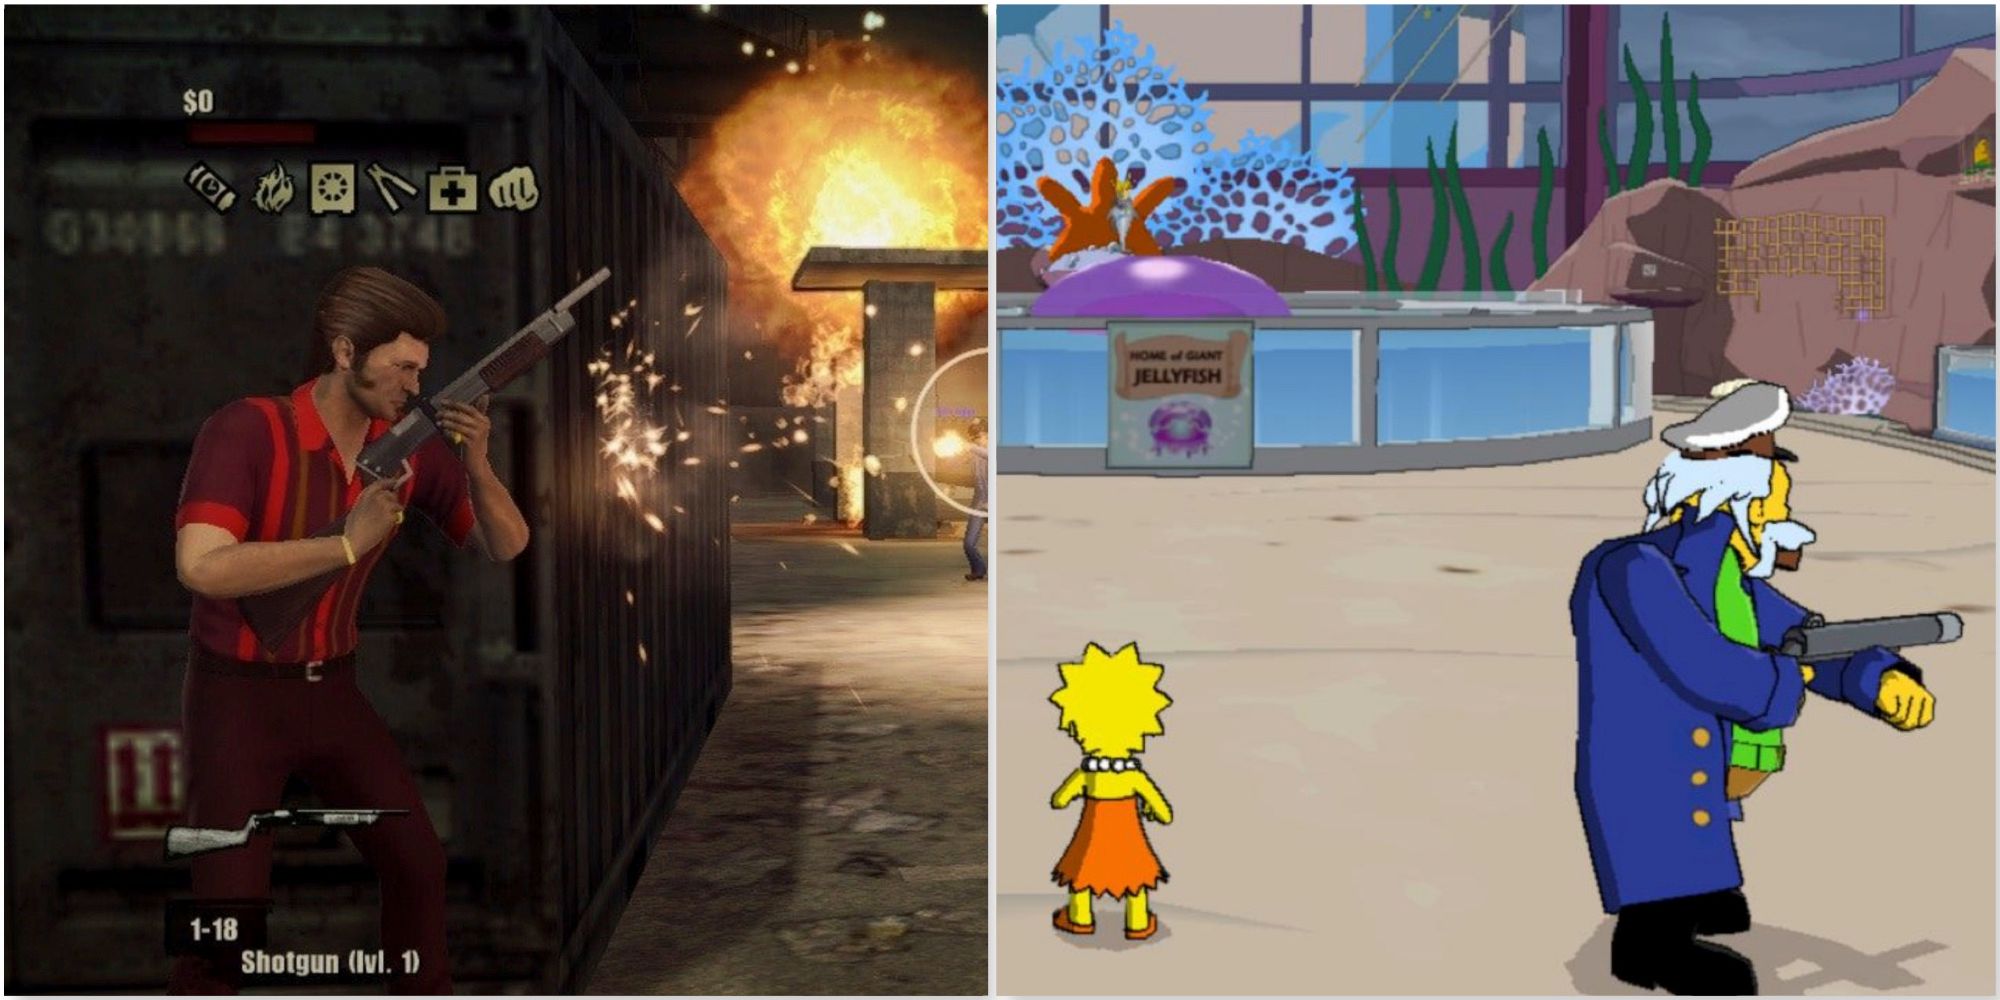 Fighting enemies in The Godfather 2 and Fighting a boss in The Simpsons Game